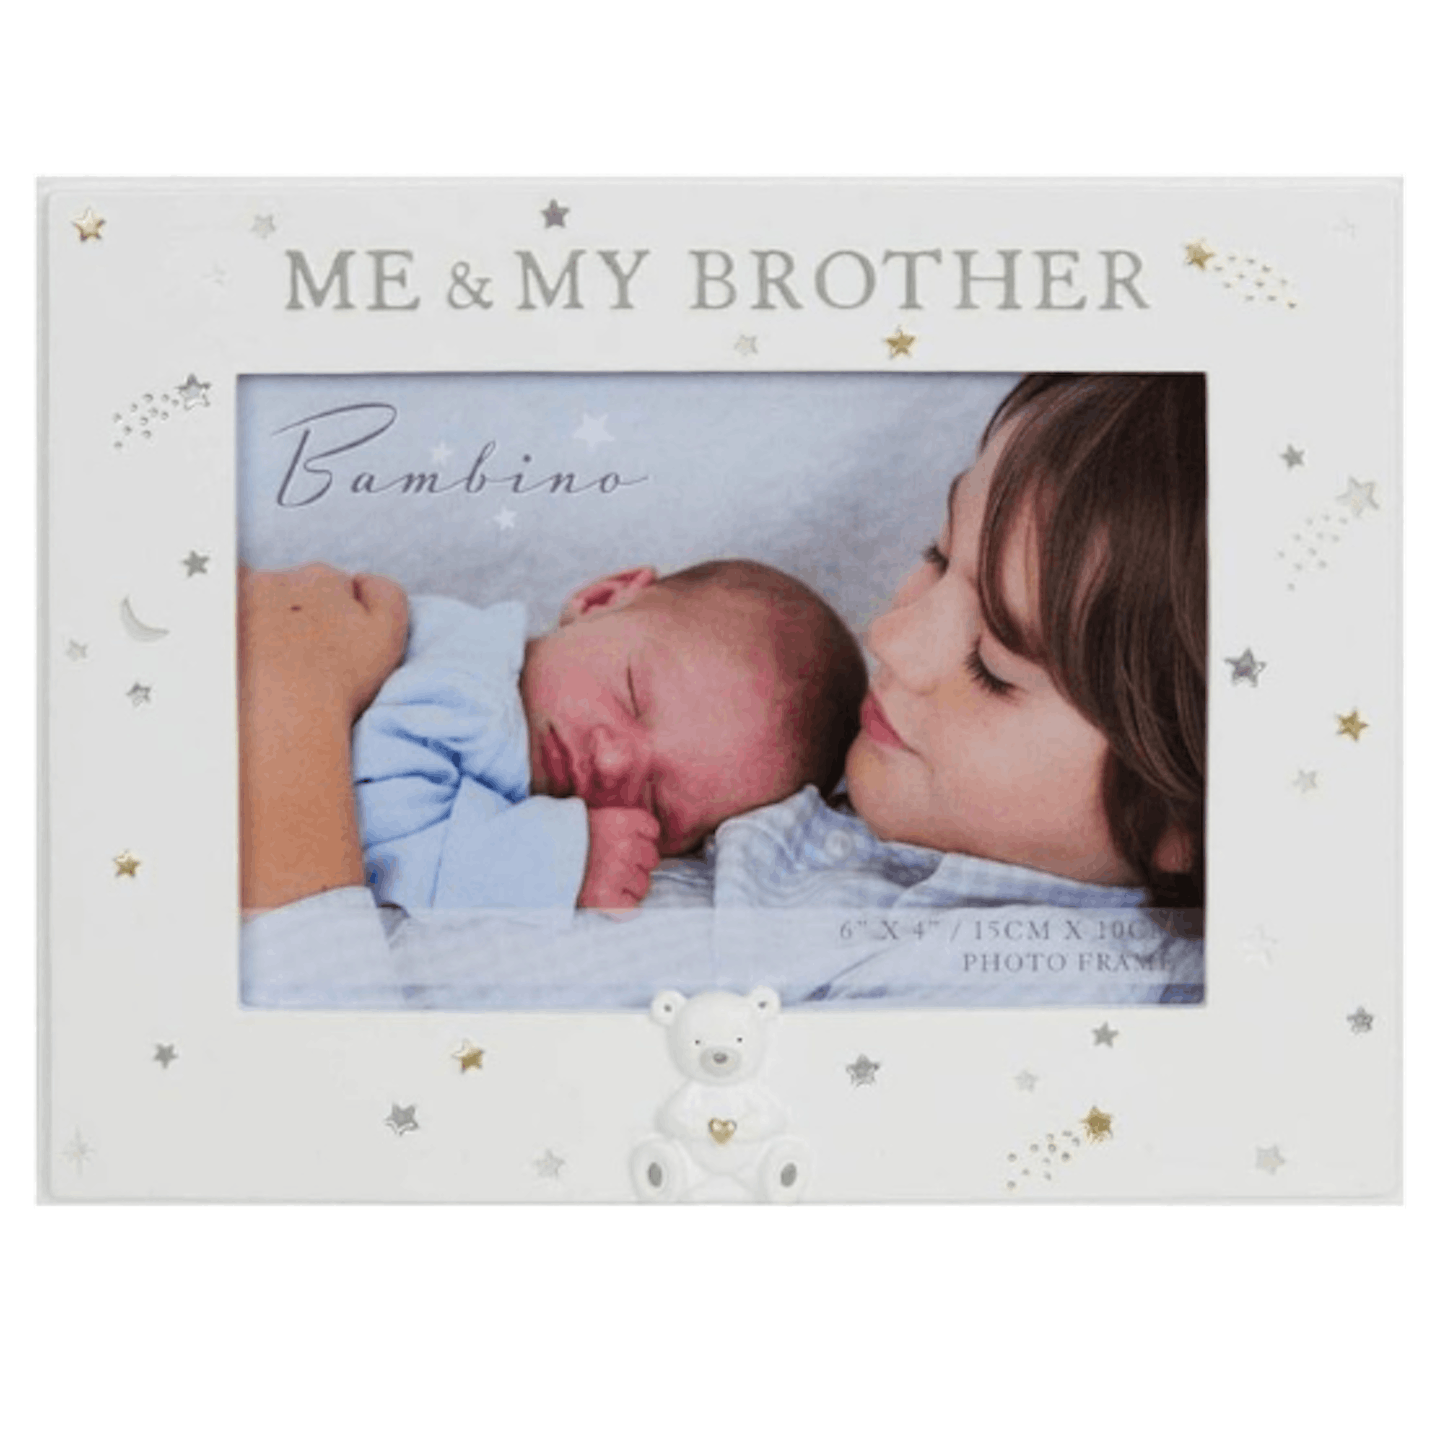 Brother photo frame